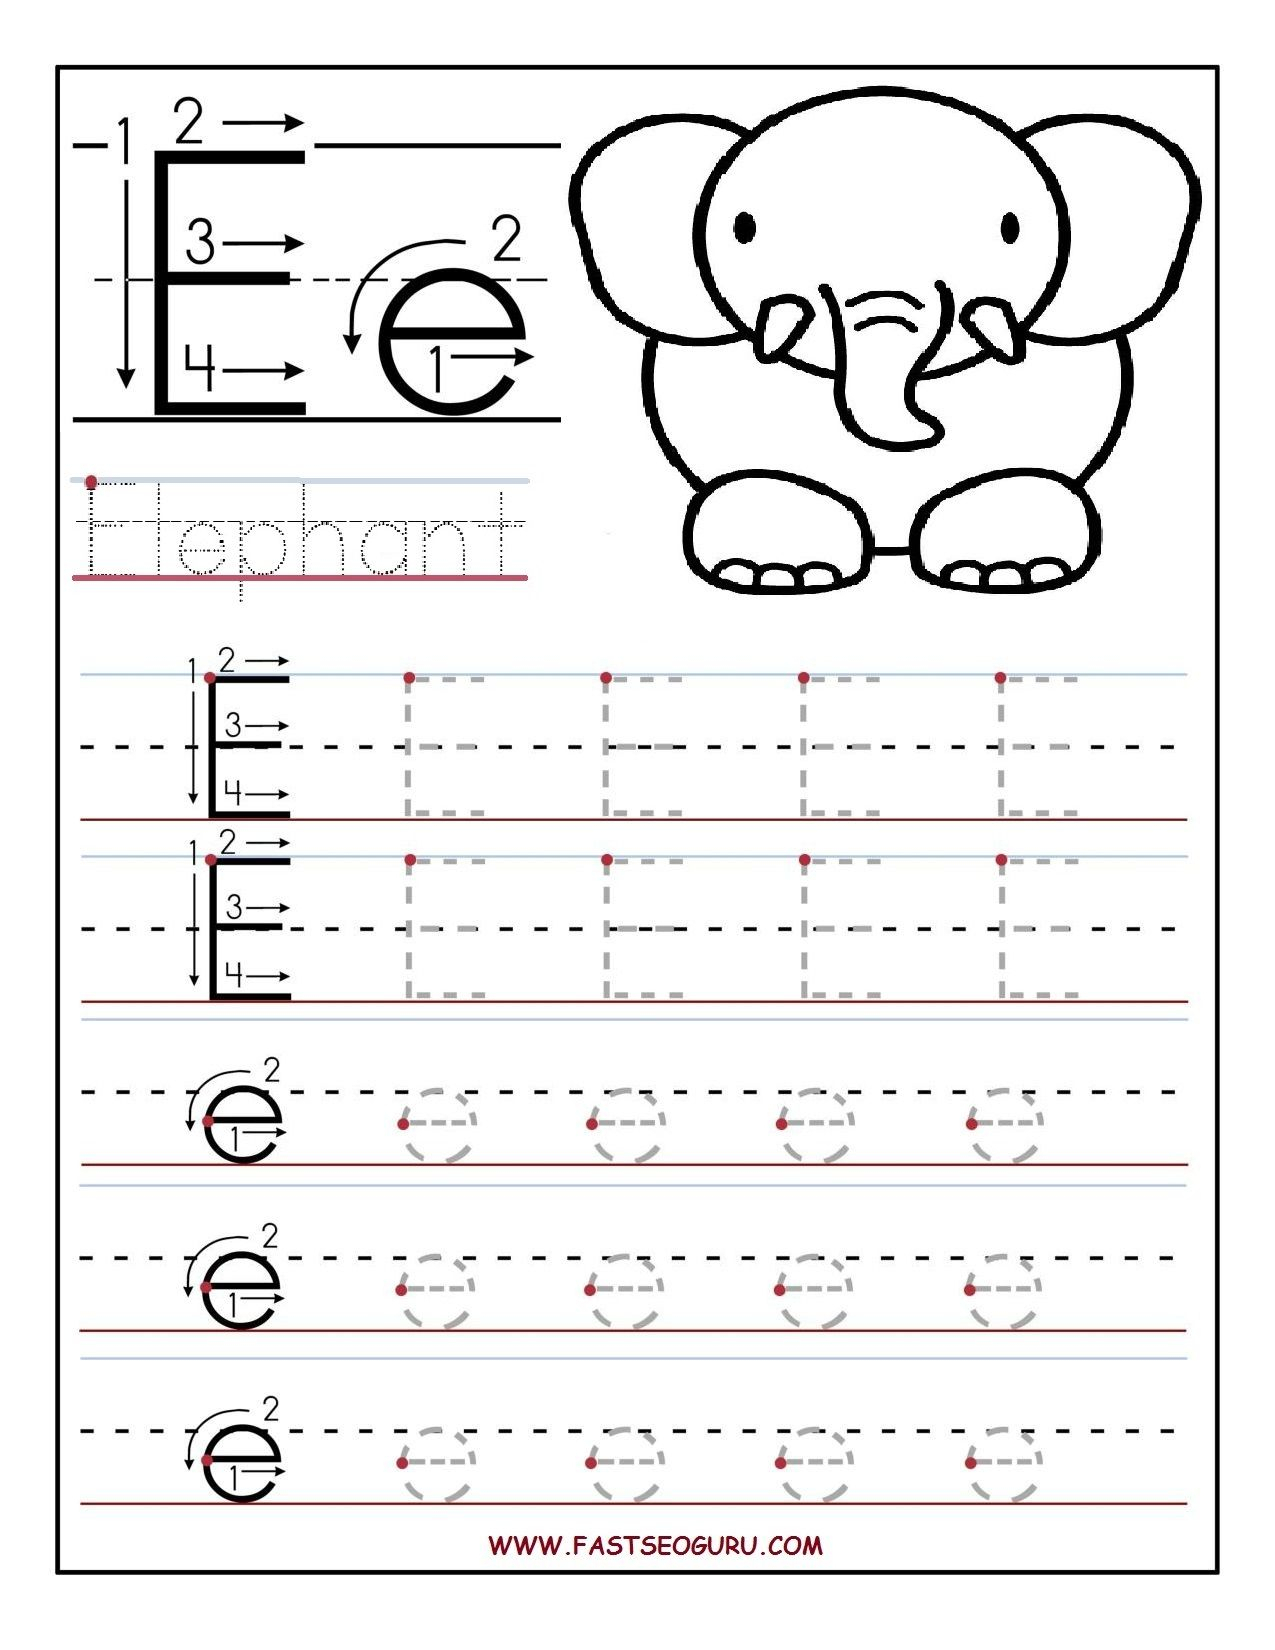 Printable Letter E Tracing Worksheets For Preschool with Letter E Worksheets For Toddlers